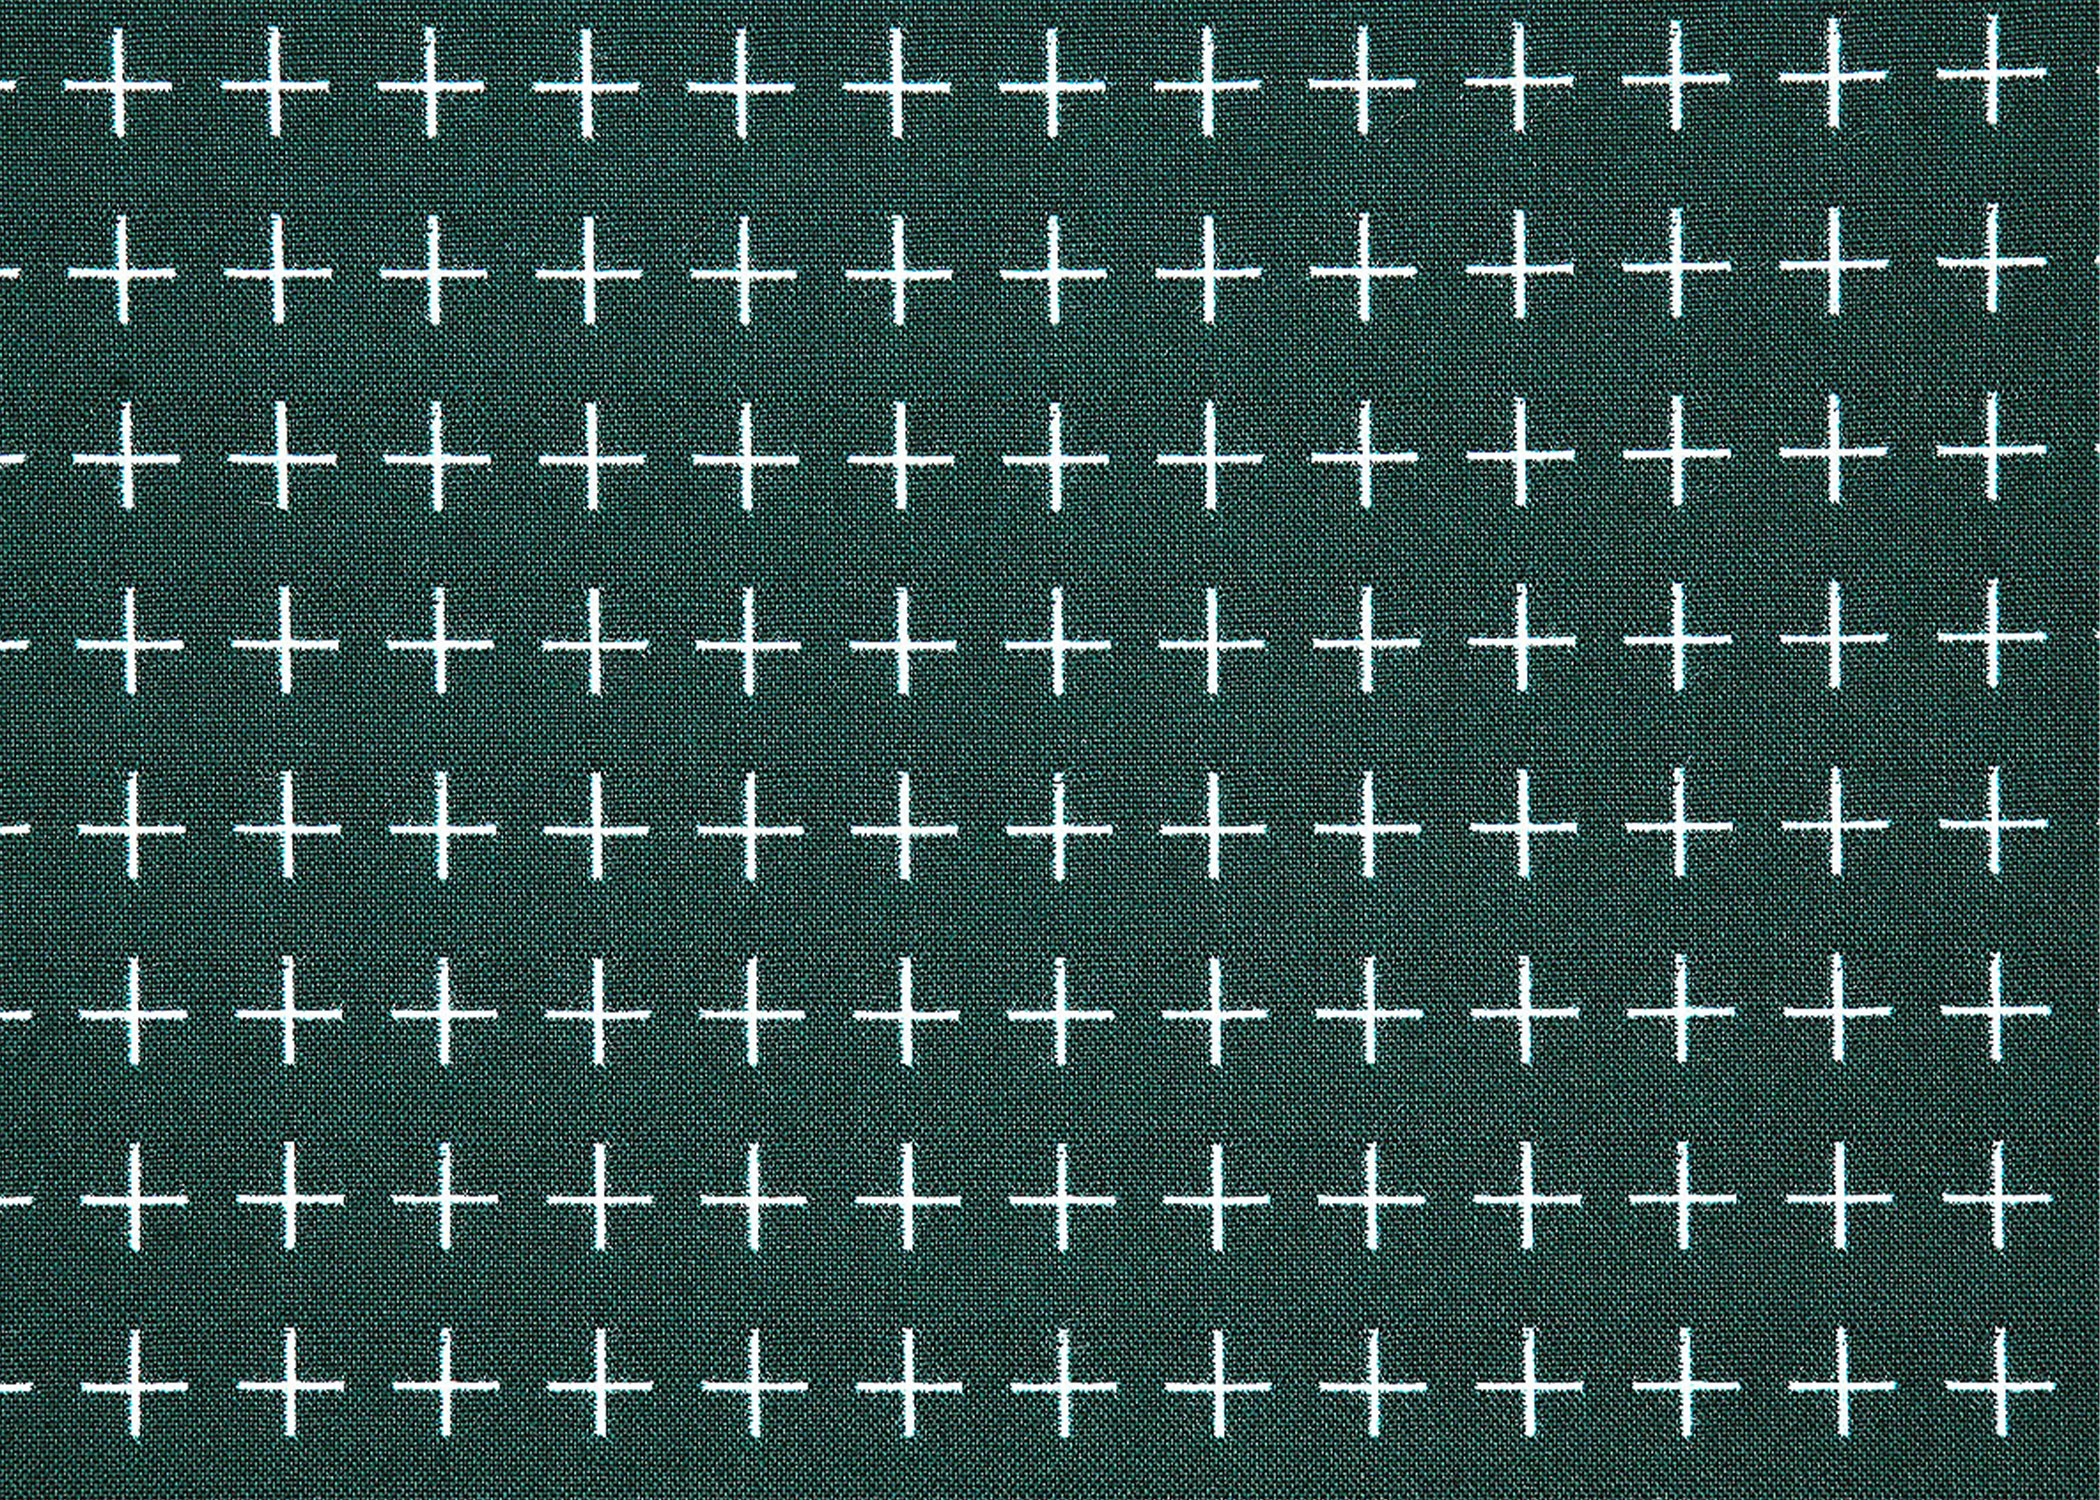 Fabric that is moss green with white plus signs in rows